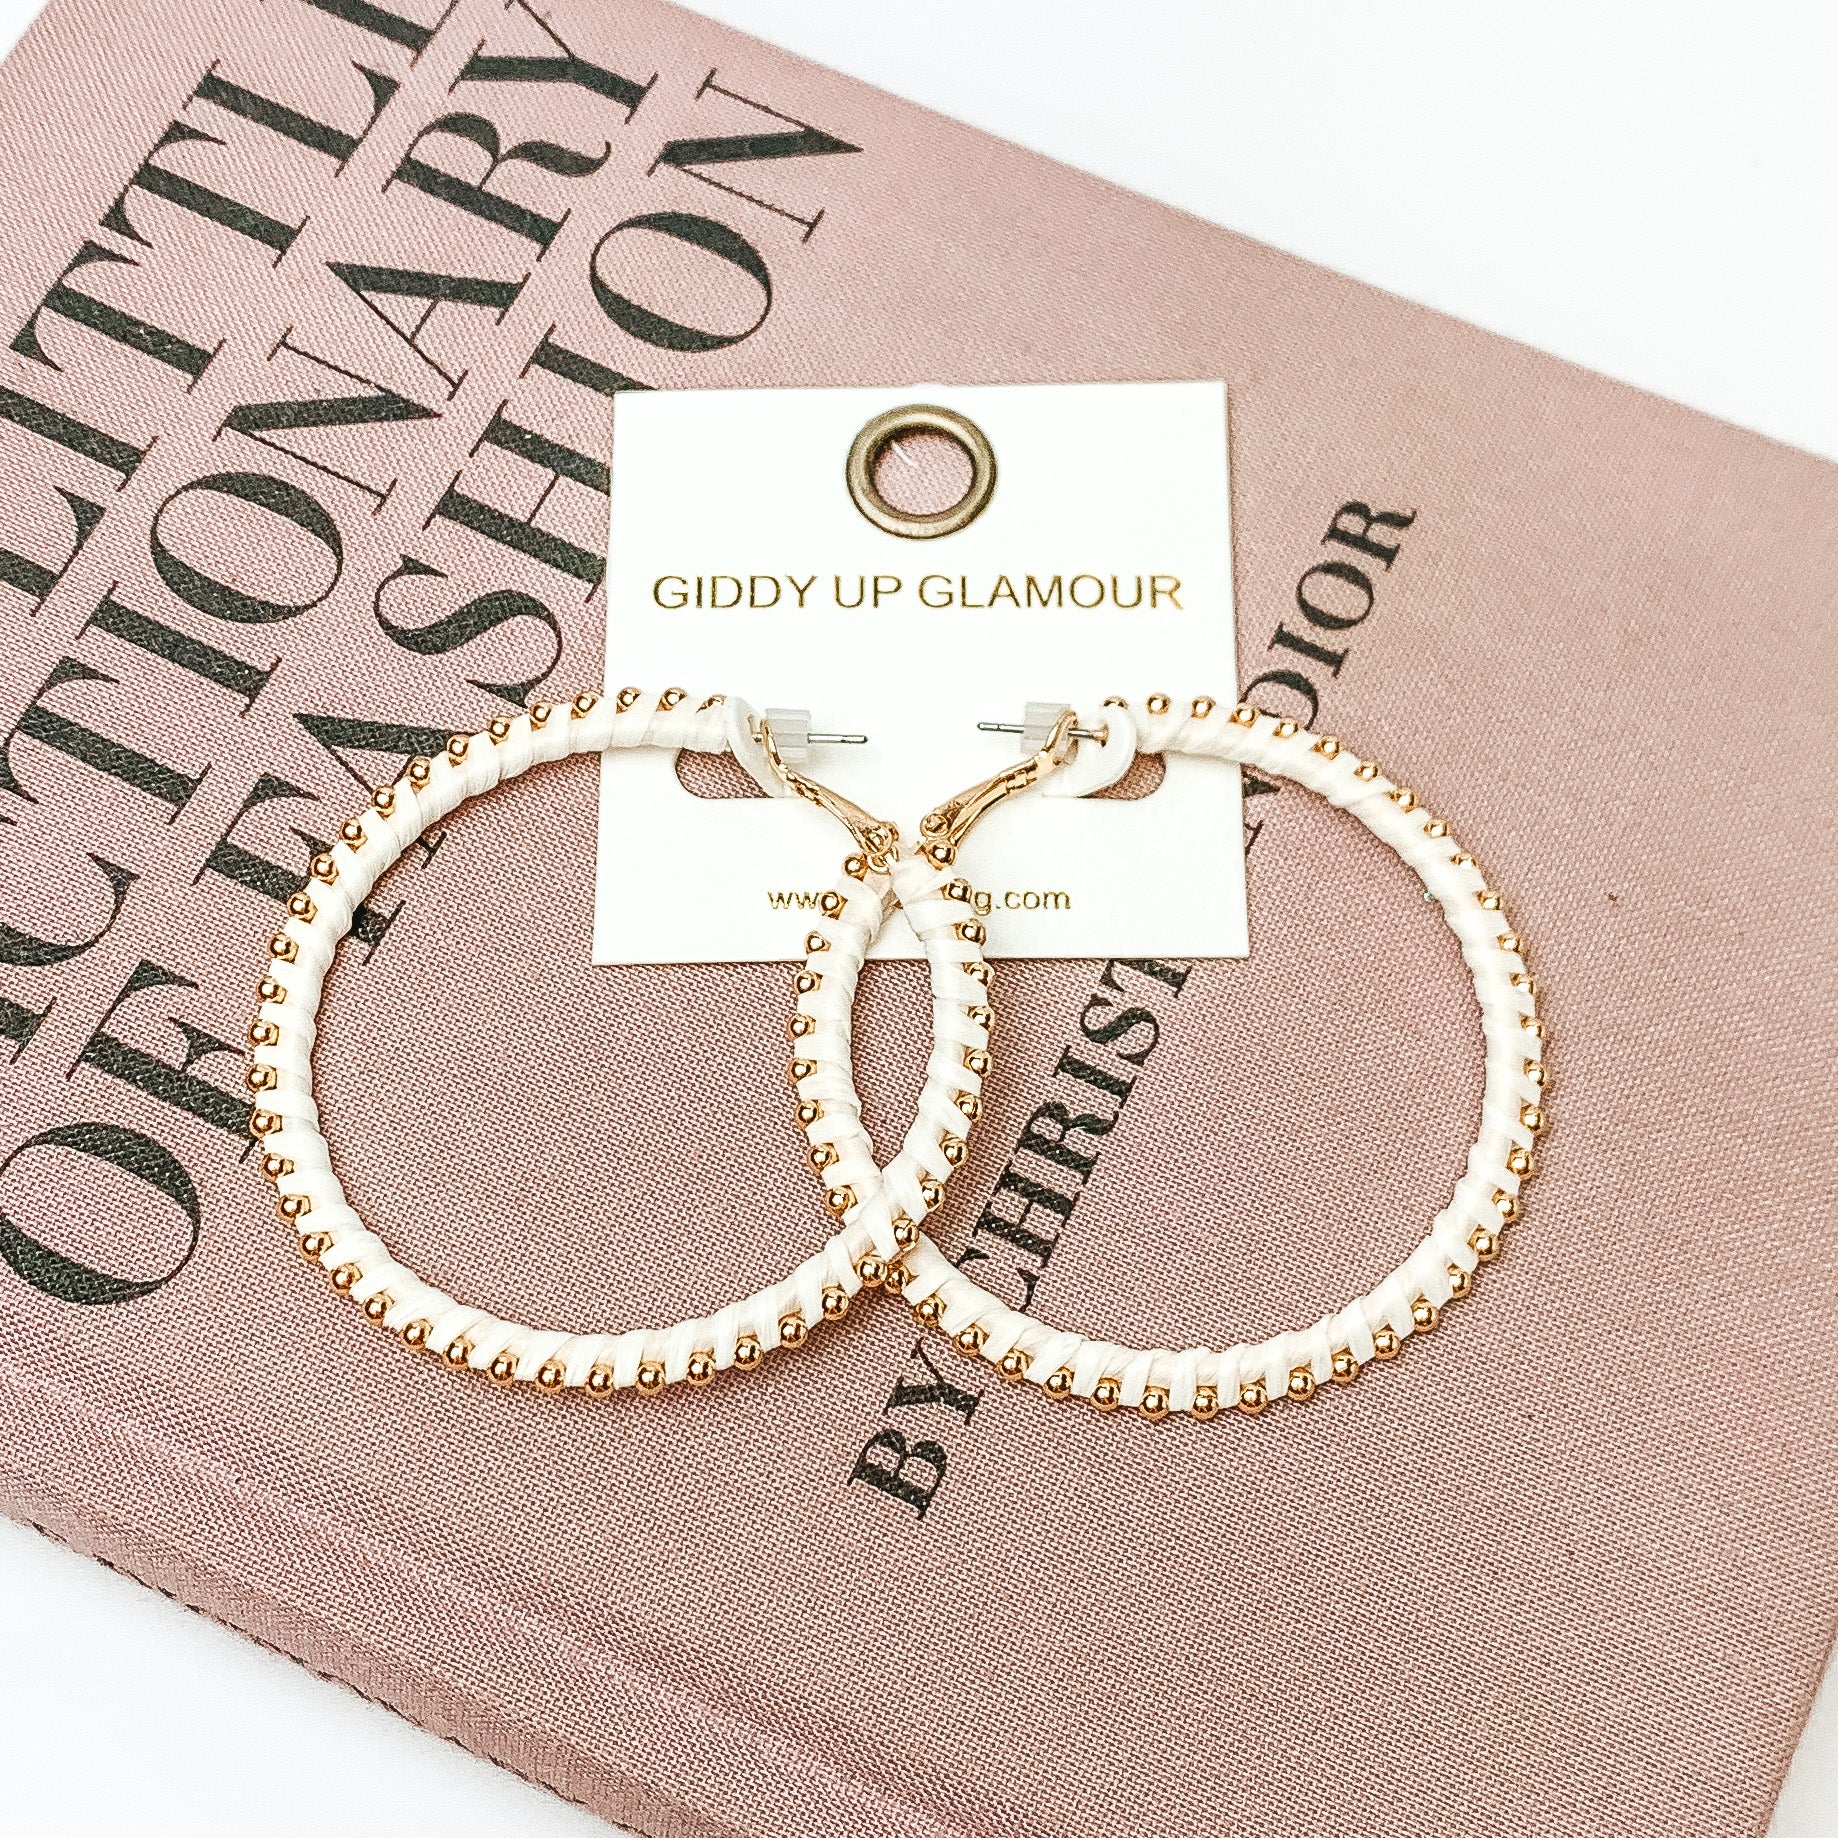 Pictured are circle ivory hoop earrings with gold beads around it. They are pictured with a pink fashion journal on a white background.